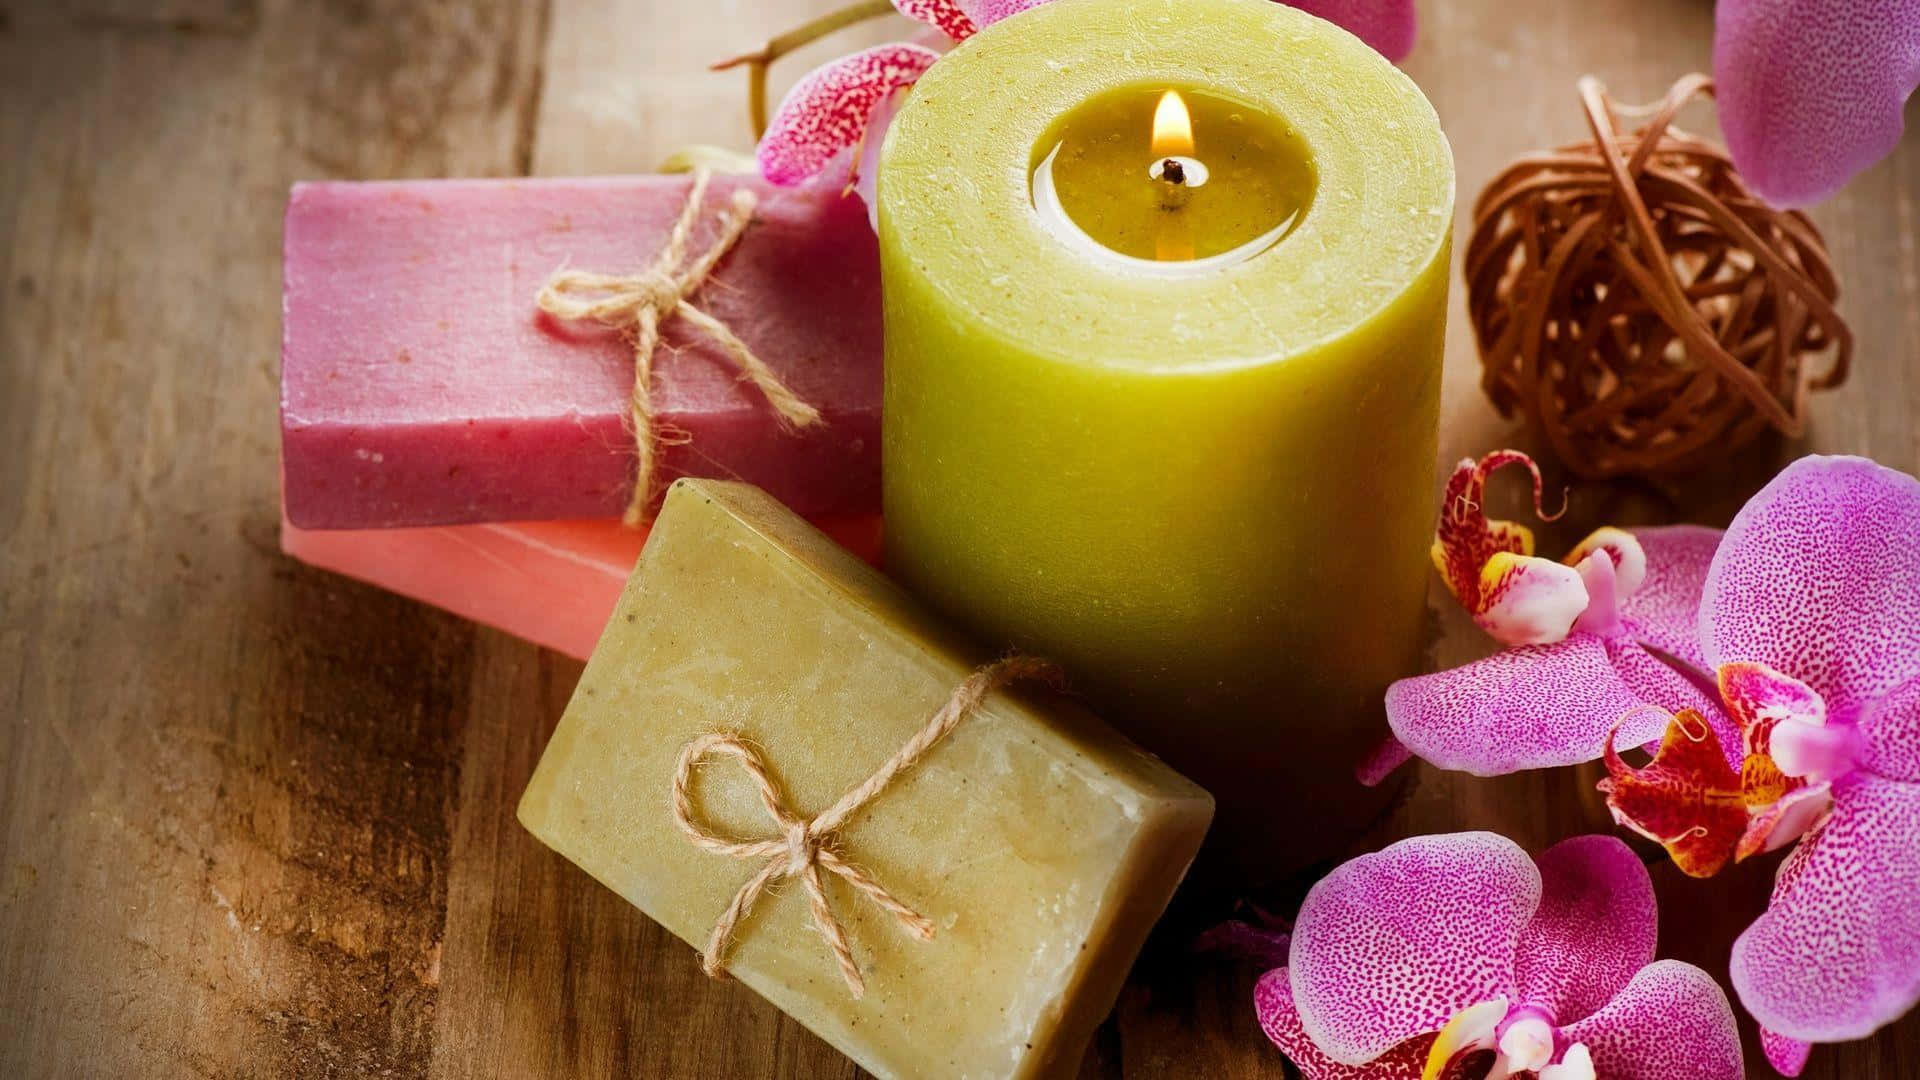 Soap Bars And Candle Wallpaper